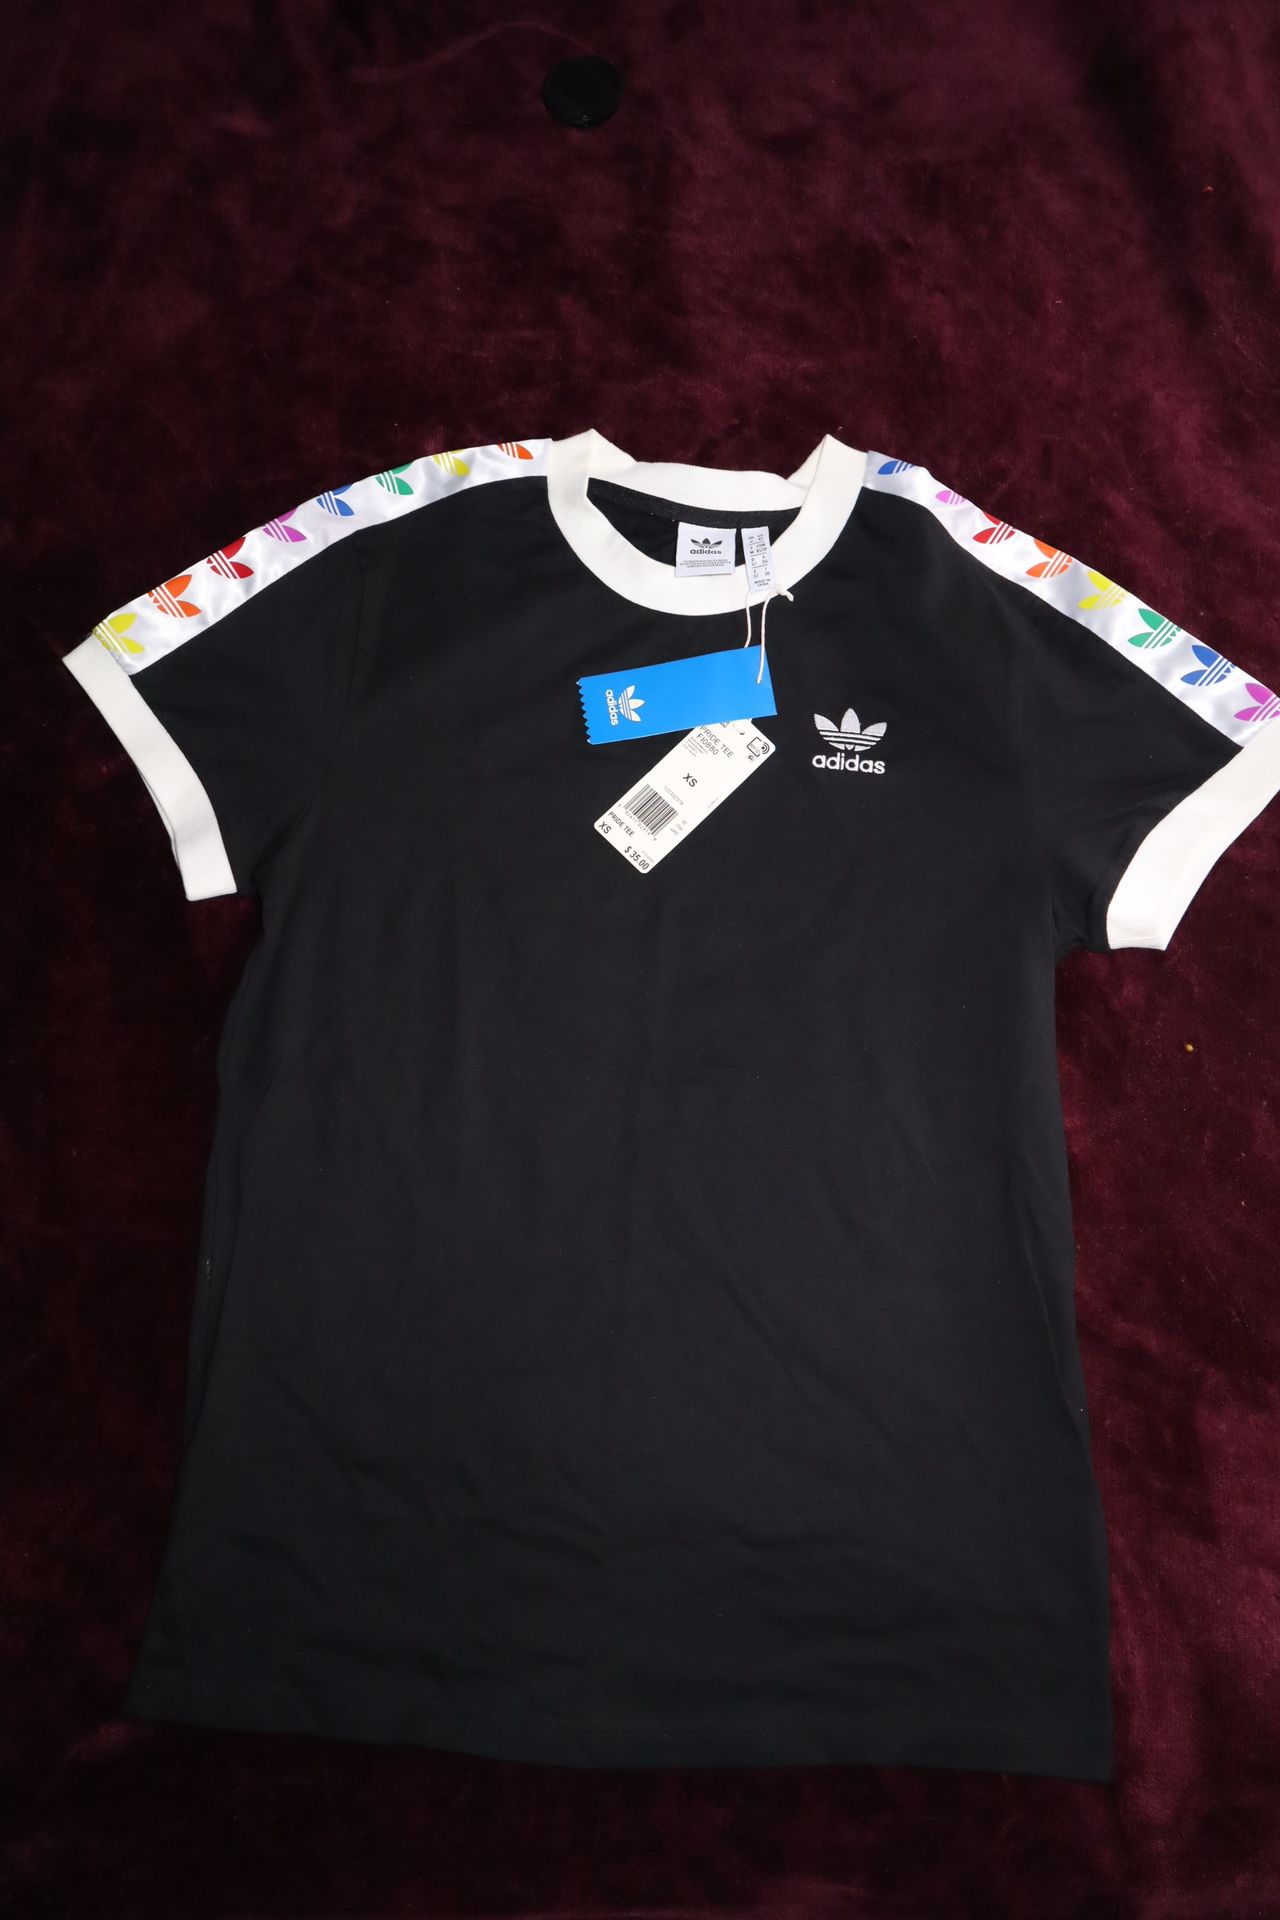 Adidas Shirt for Sale in NY - OfferUp